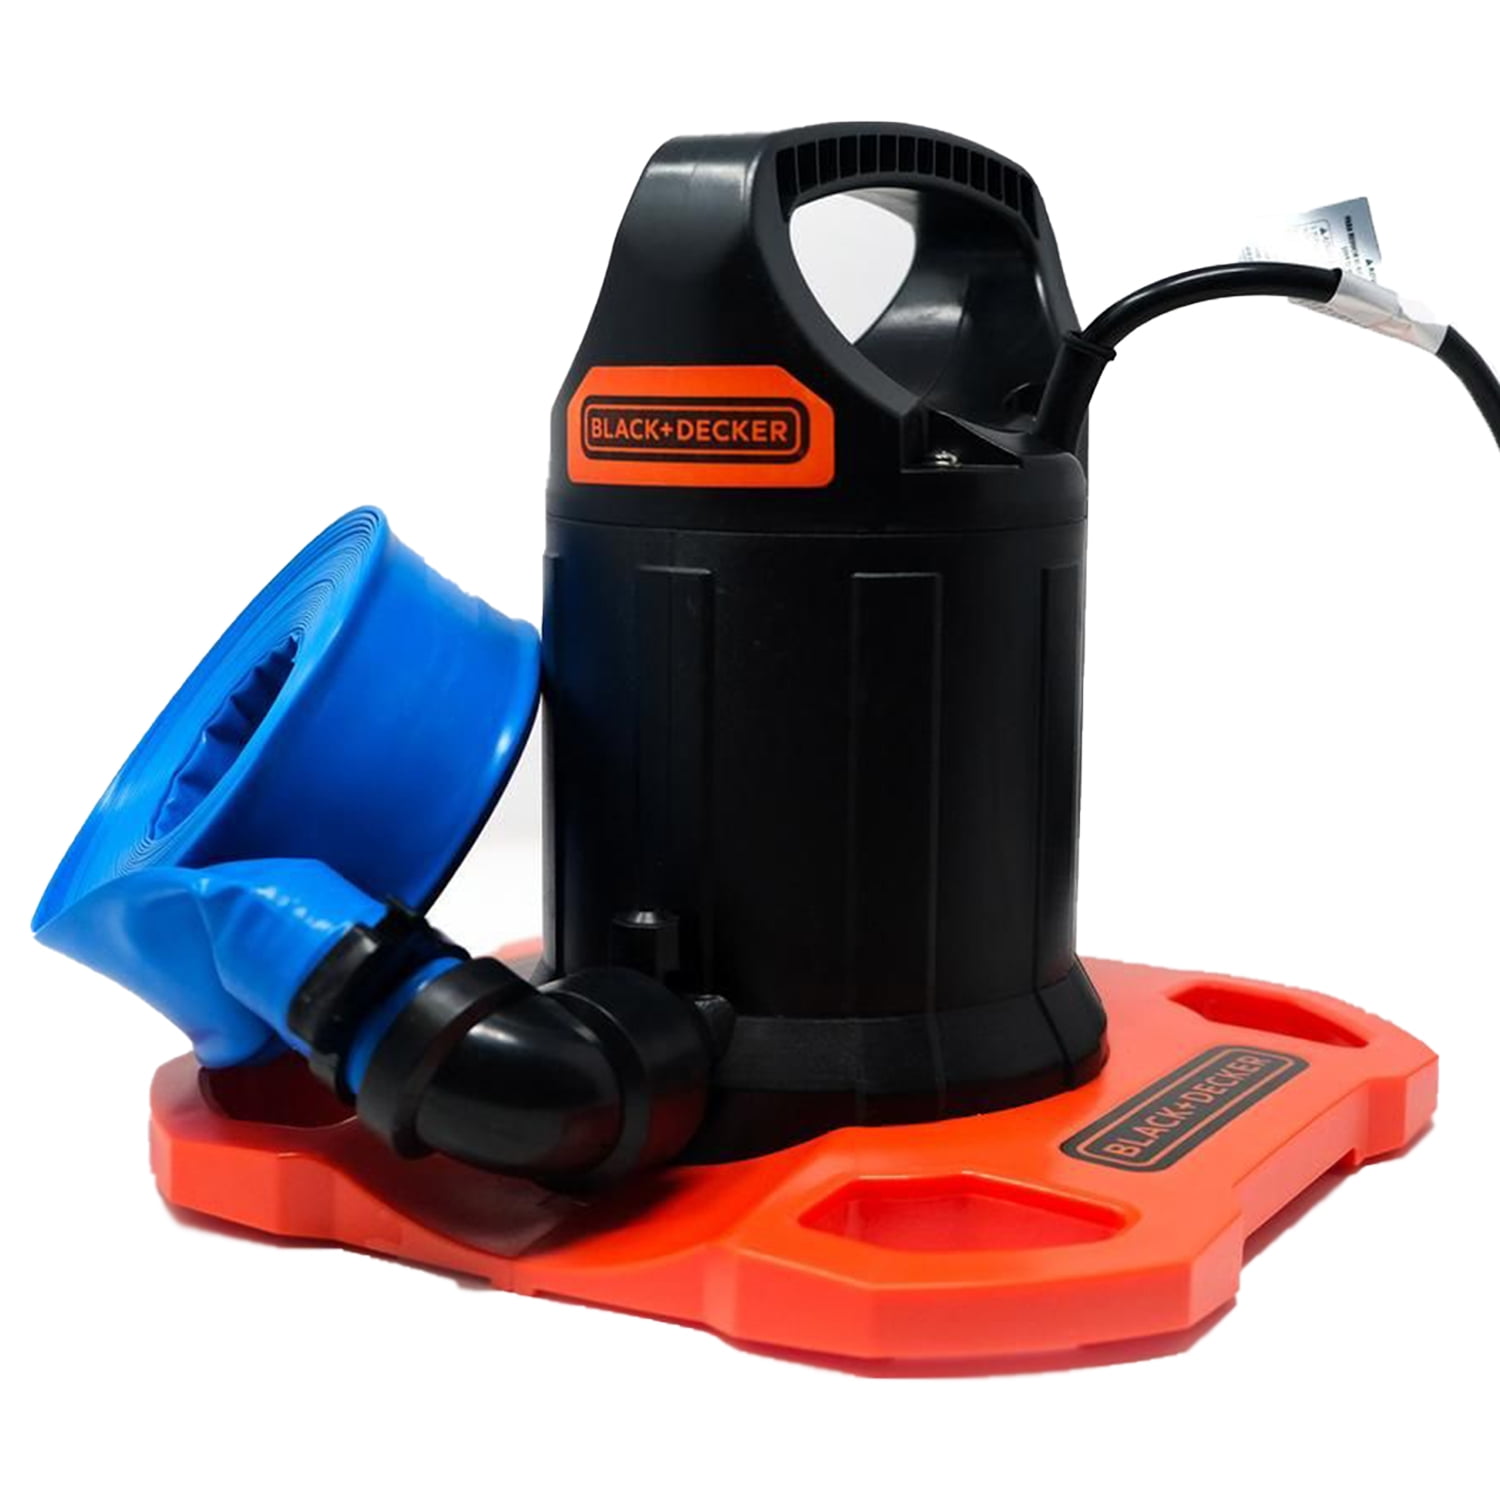 Black and Decker Swimming Pool Cover pump Review & Test on a